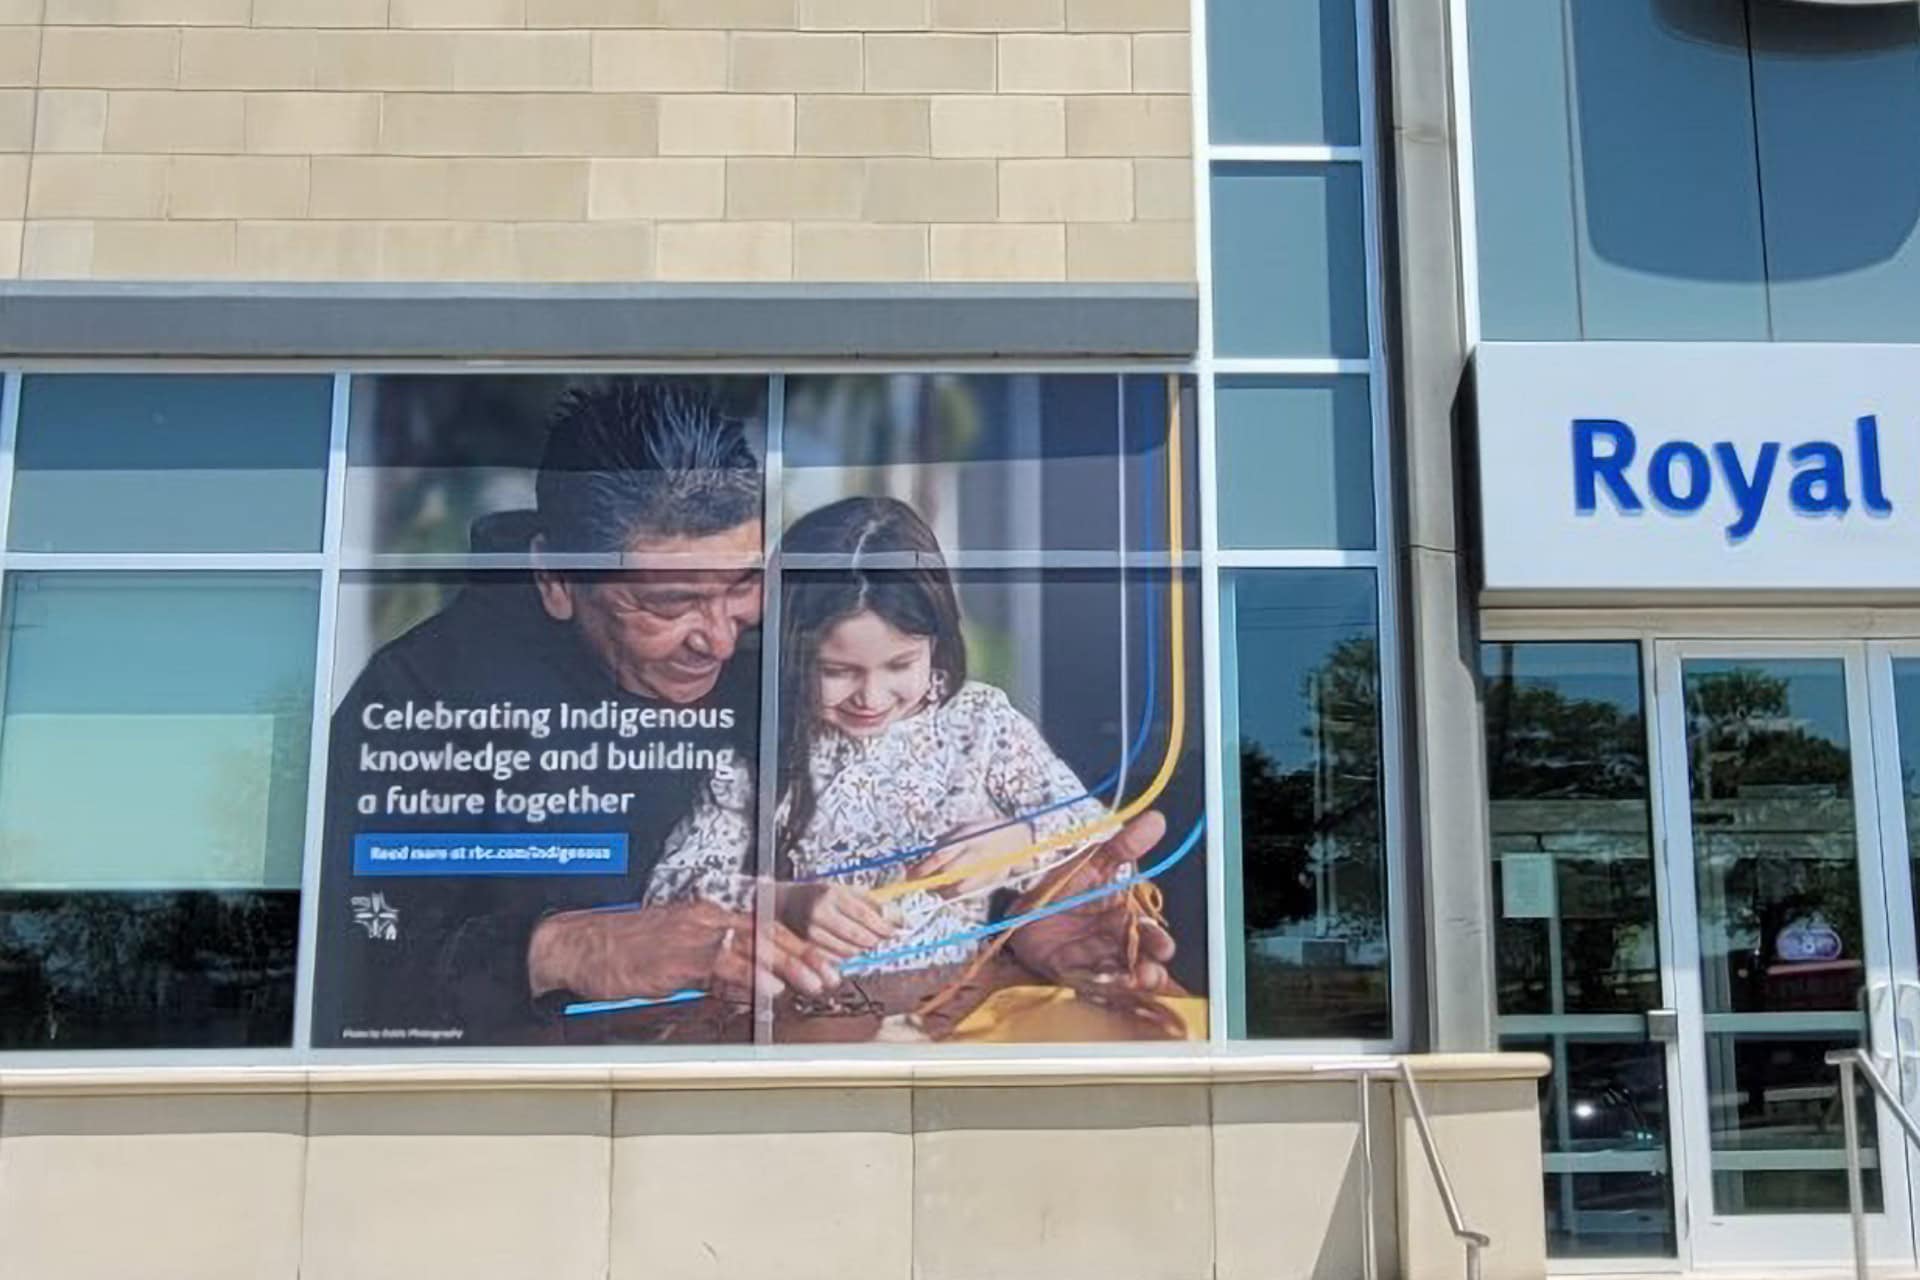 An exterior shot of an RBC branch. On the windows of the branch is a large design showing an Indigenous man and a young girl looking at something together. The text reads 'Celebrating Indigenous knowledge and building a future together' over top of a link to a webpage.